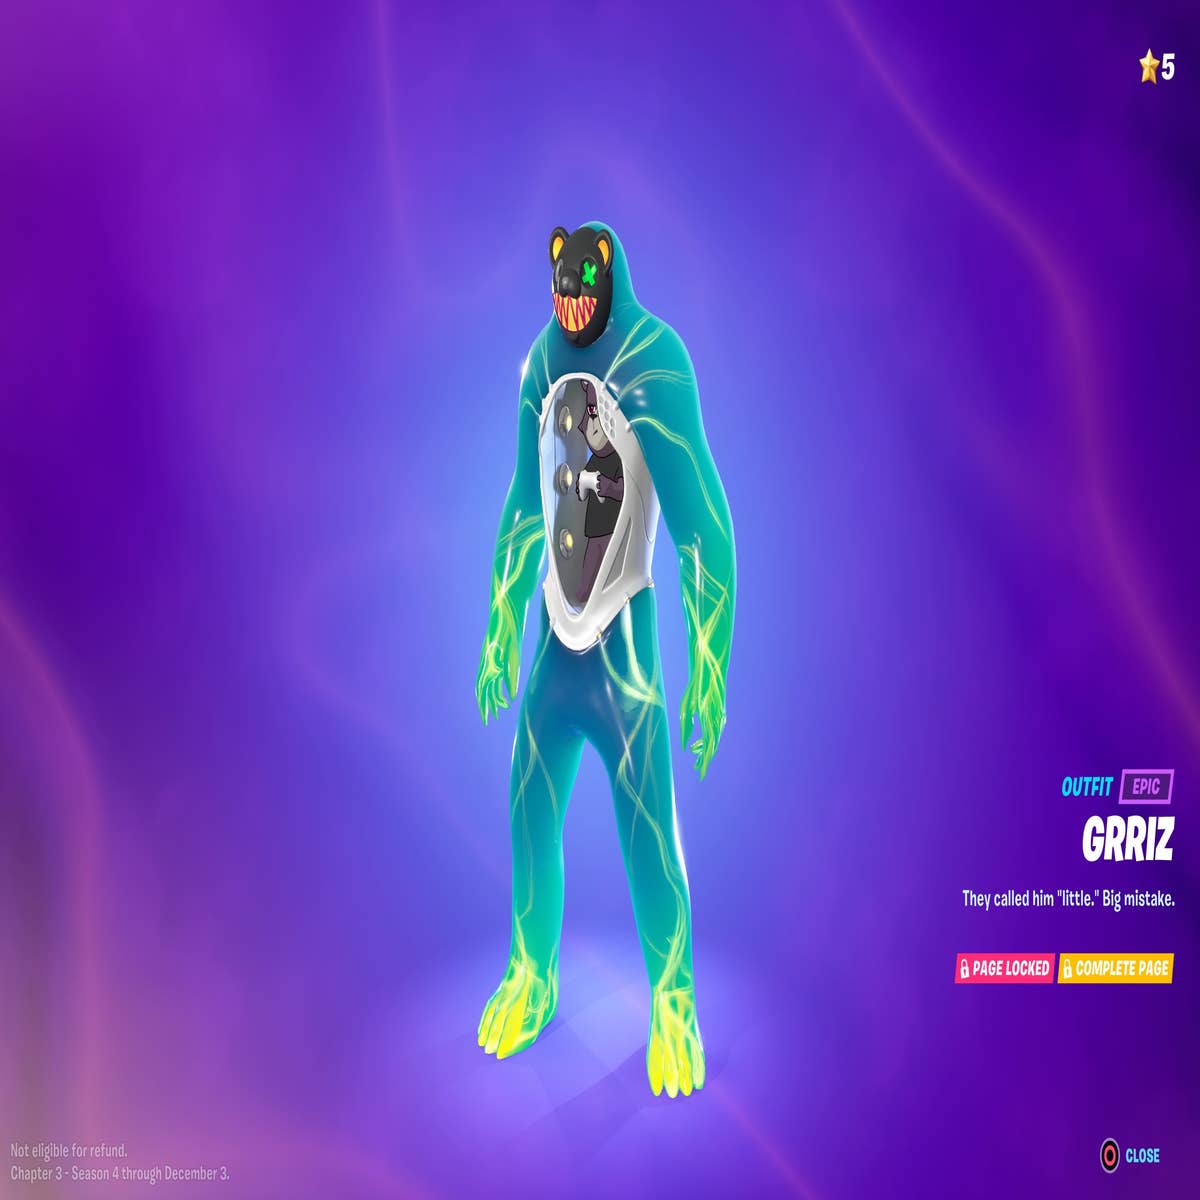 Fortnite Chapter 3 Season 4 Battle Pass skins, including Spider-Gwen,  Paradigm, and Twyn